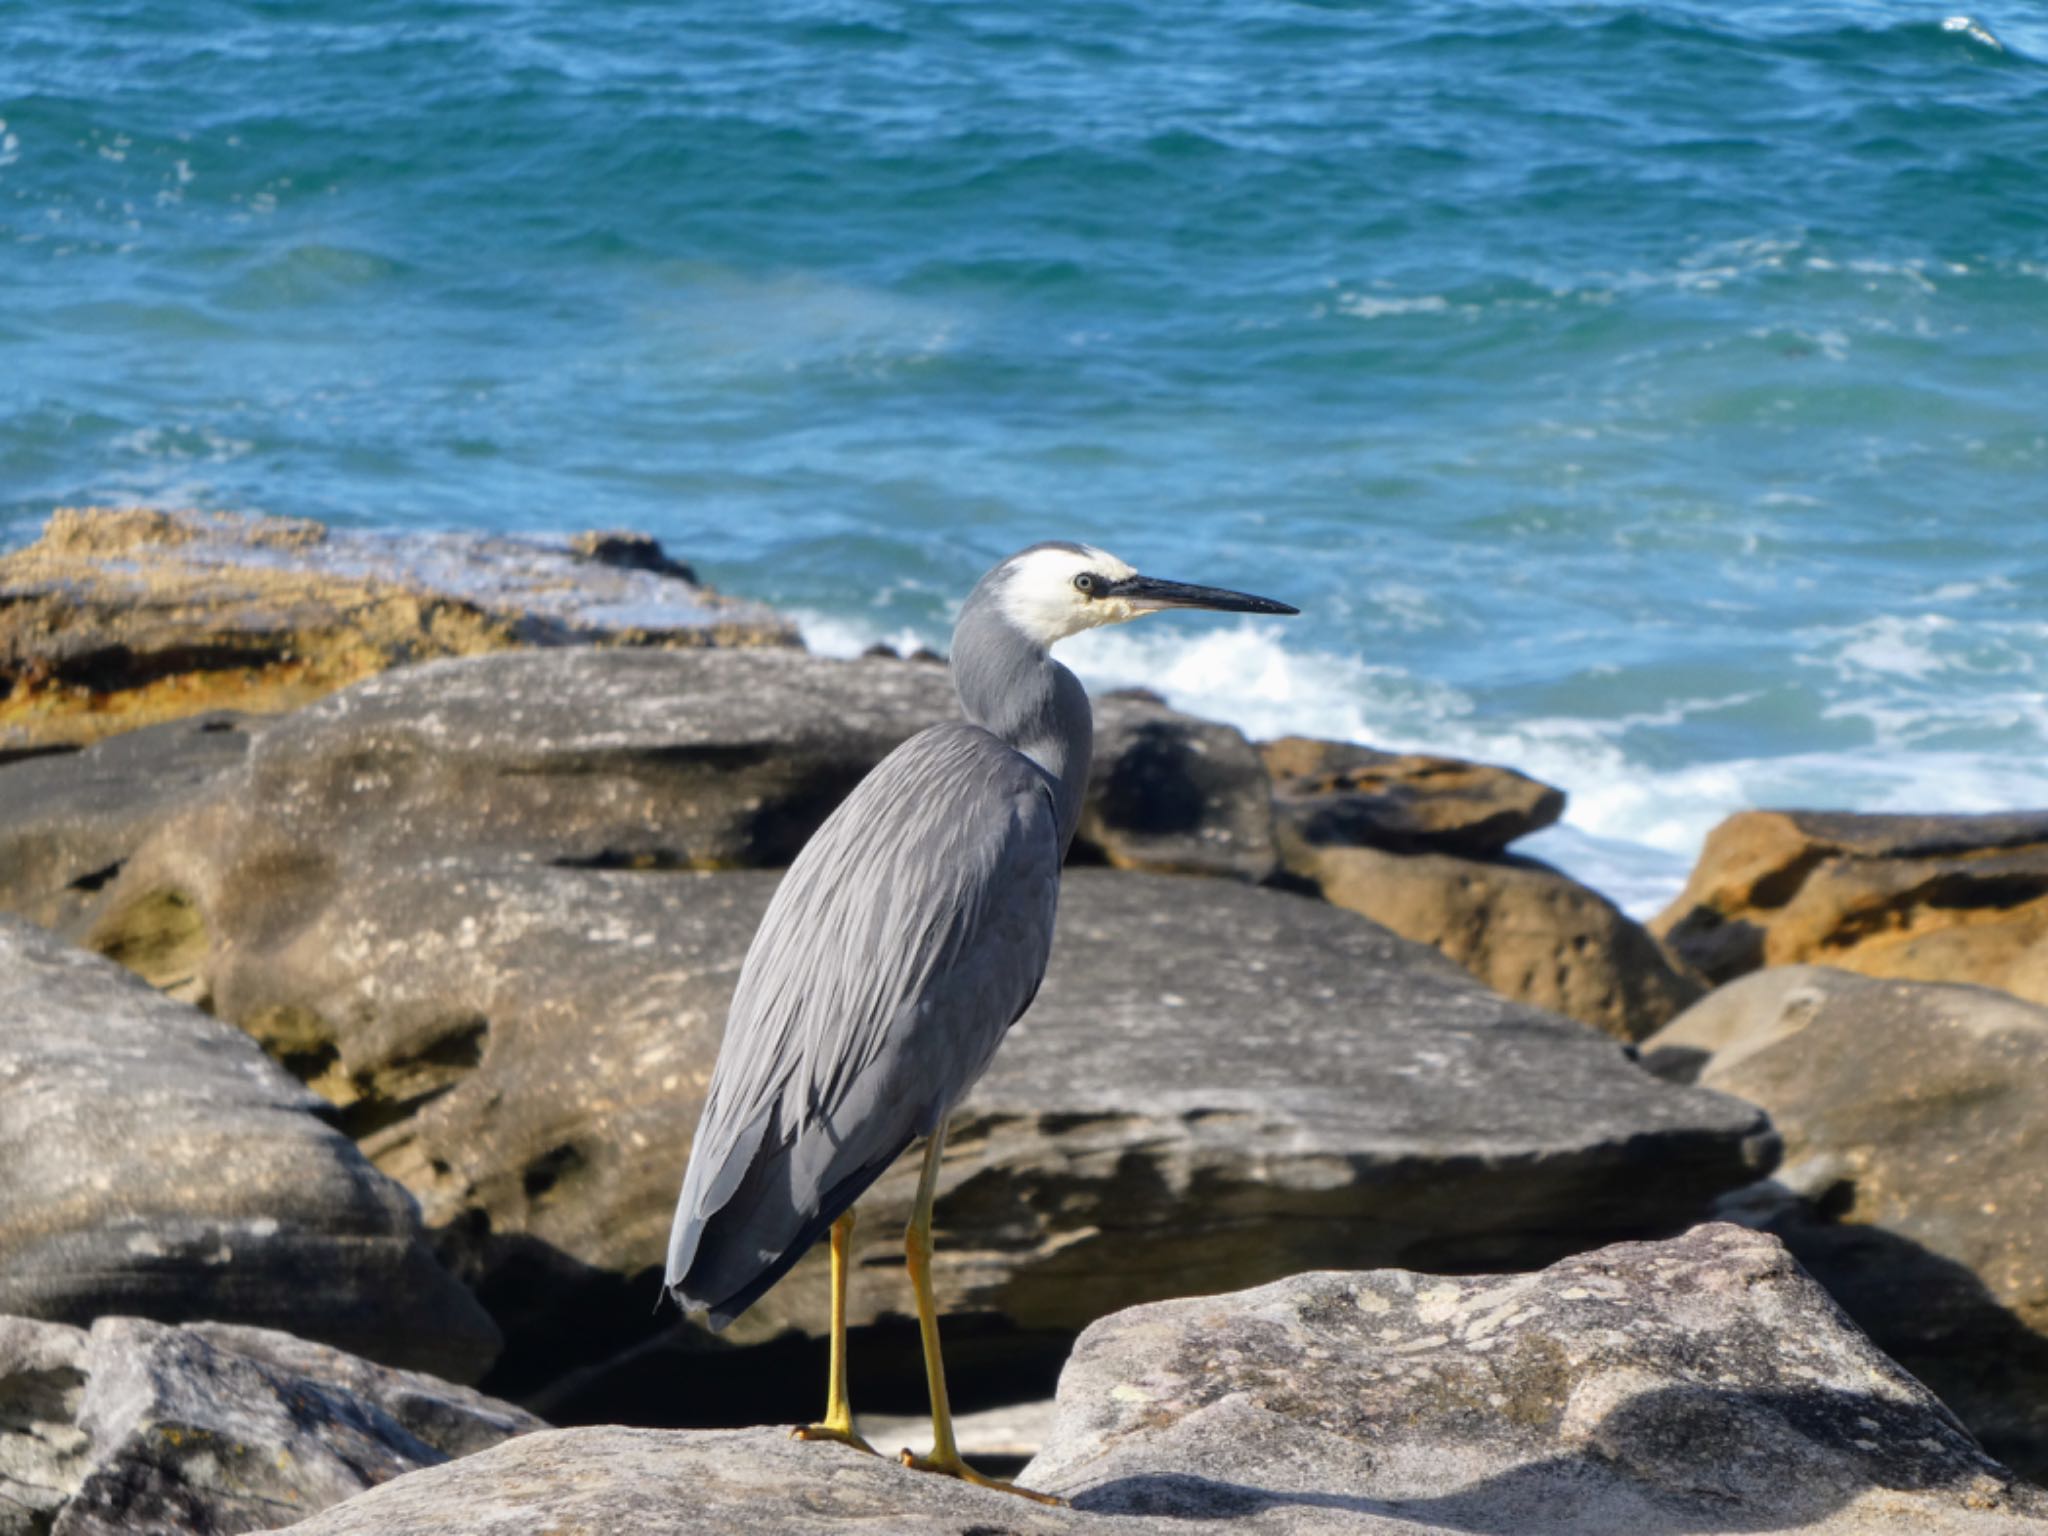 Photo of White-faced Heron at Manly, NSW, Australia by Maki